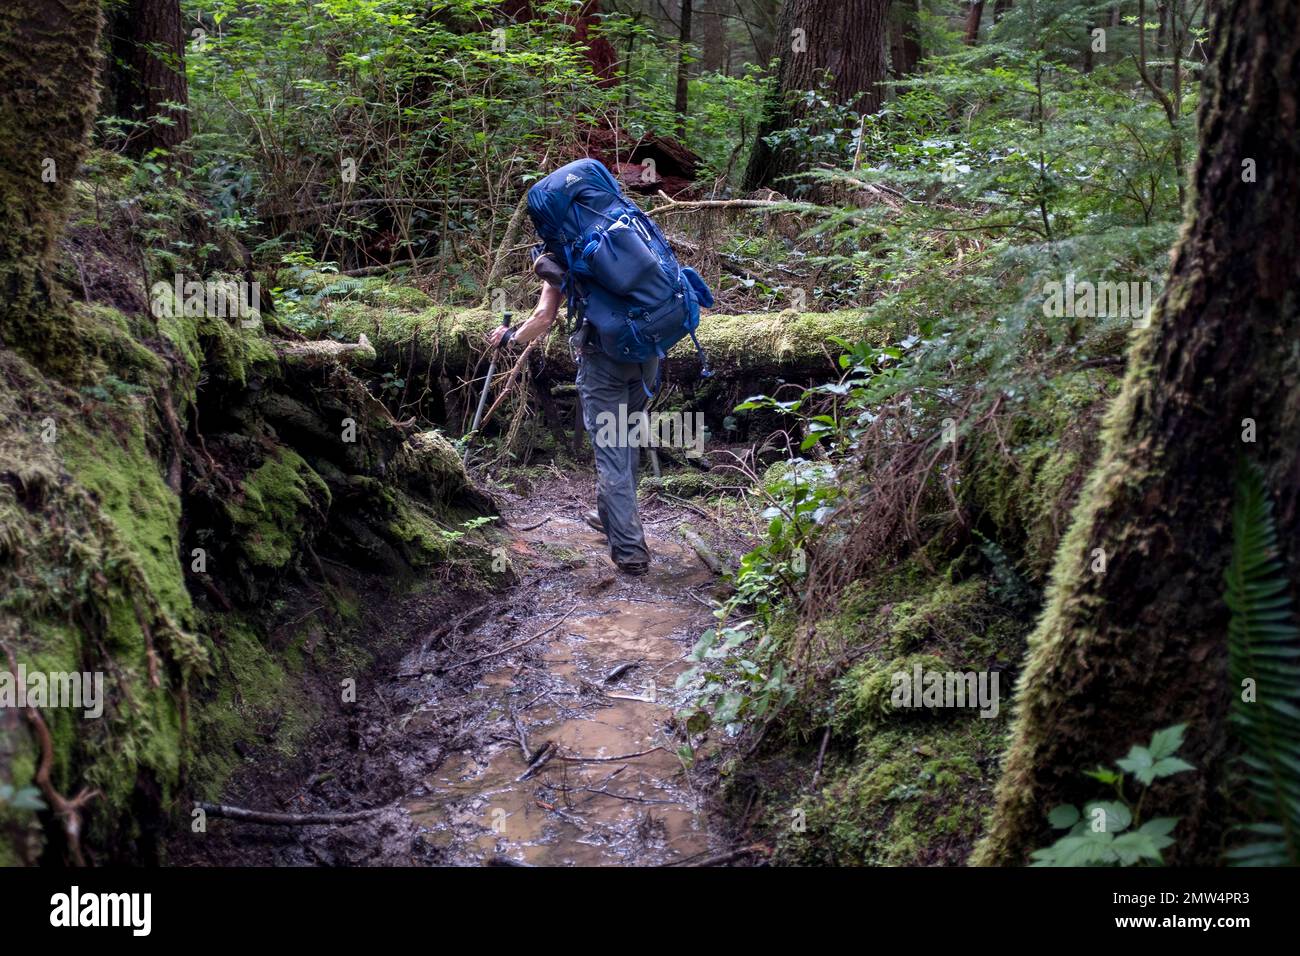 WA20813-00....WASHINGTON - Vicky Spring backpacking the muddy trail between Oil City Beach and Mosquito Beach in Olympic National Park. MR #S1 Stock Photo